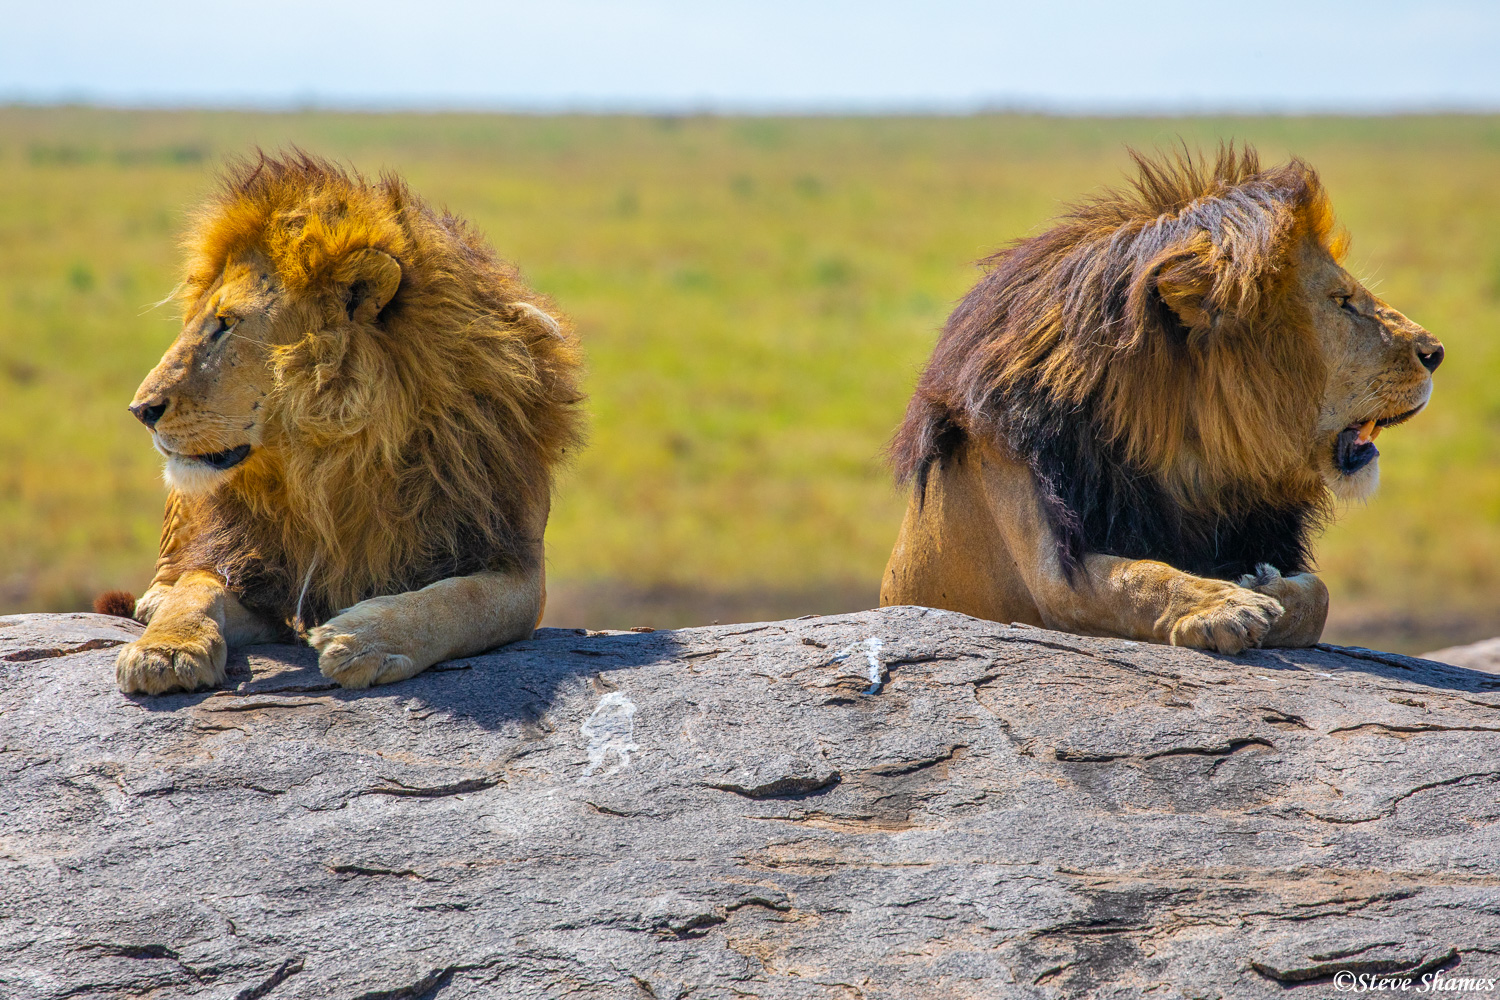 The way they are positioned, I call this "lion bookends"